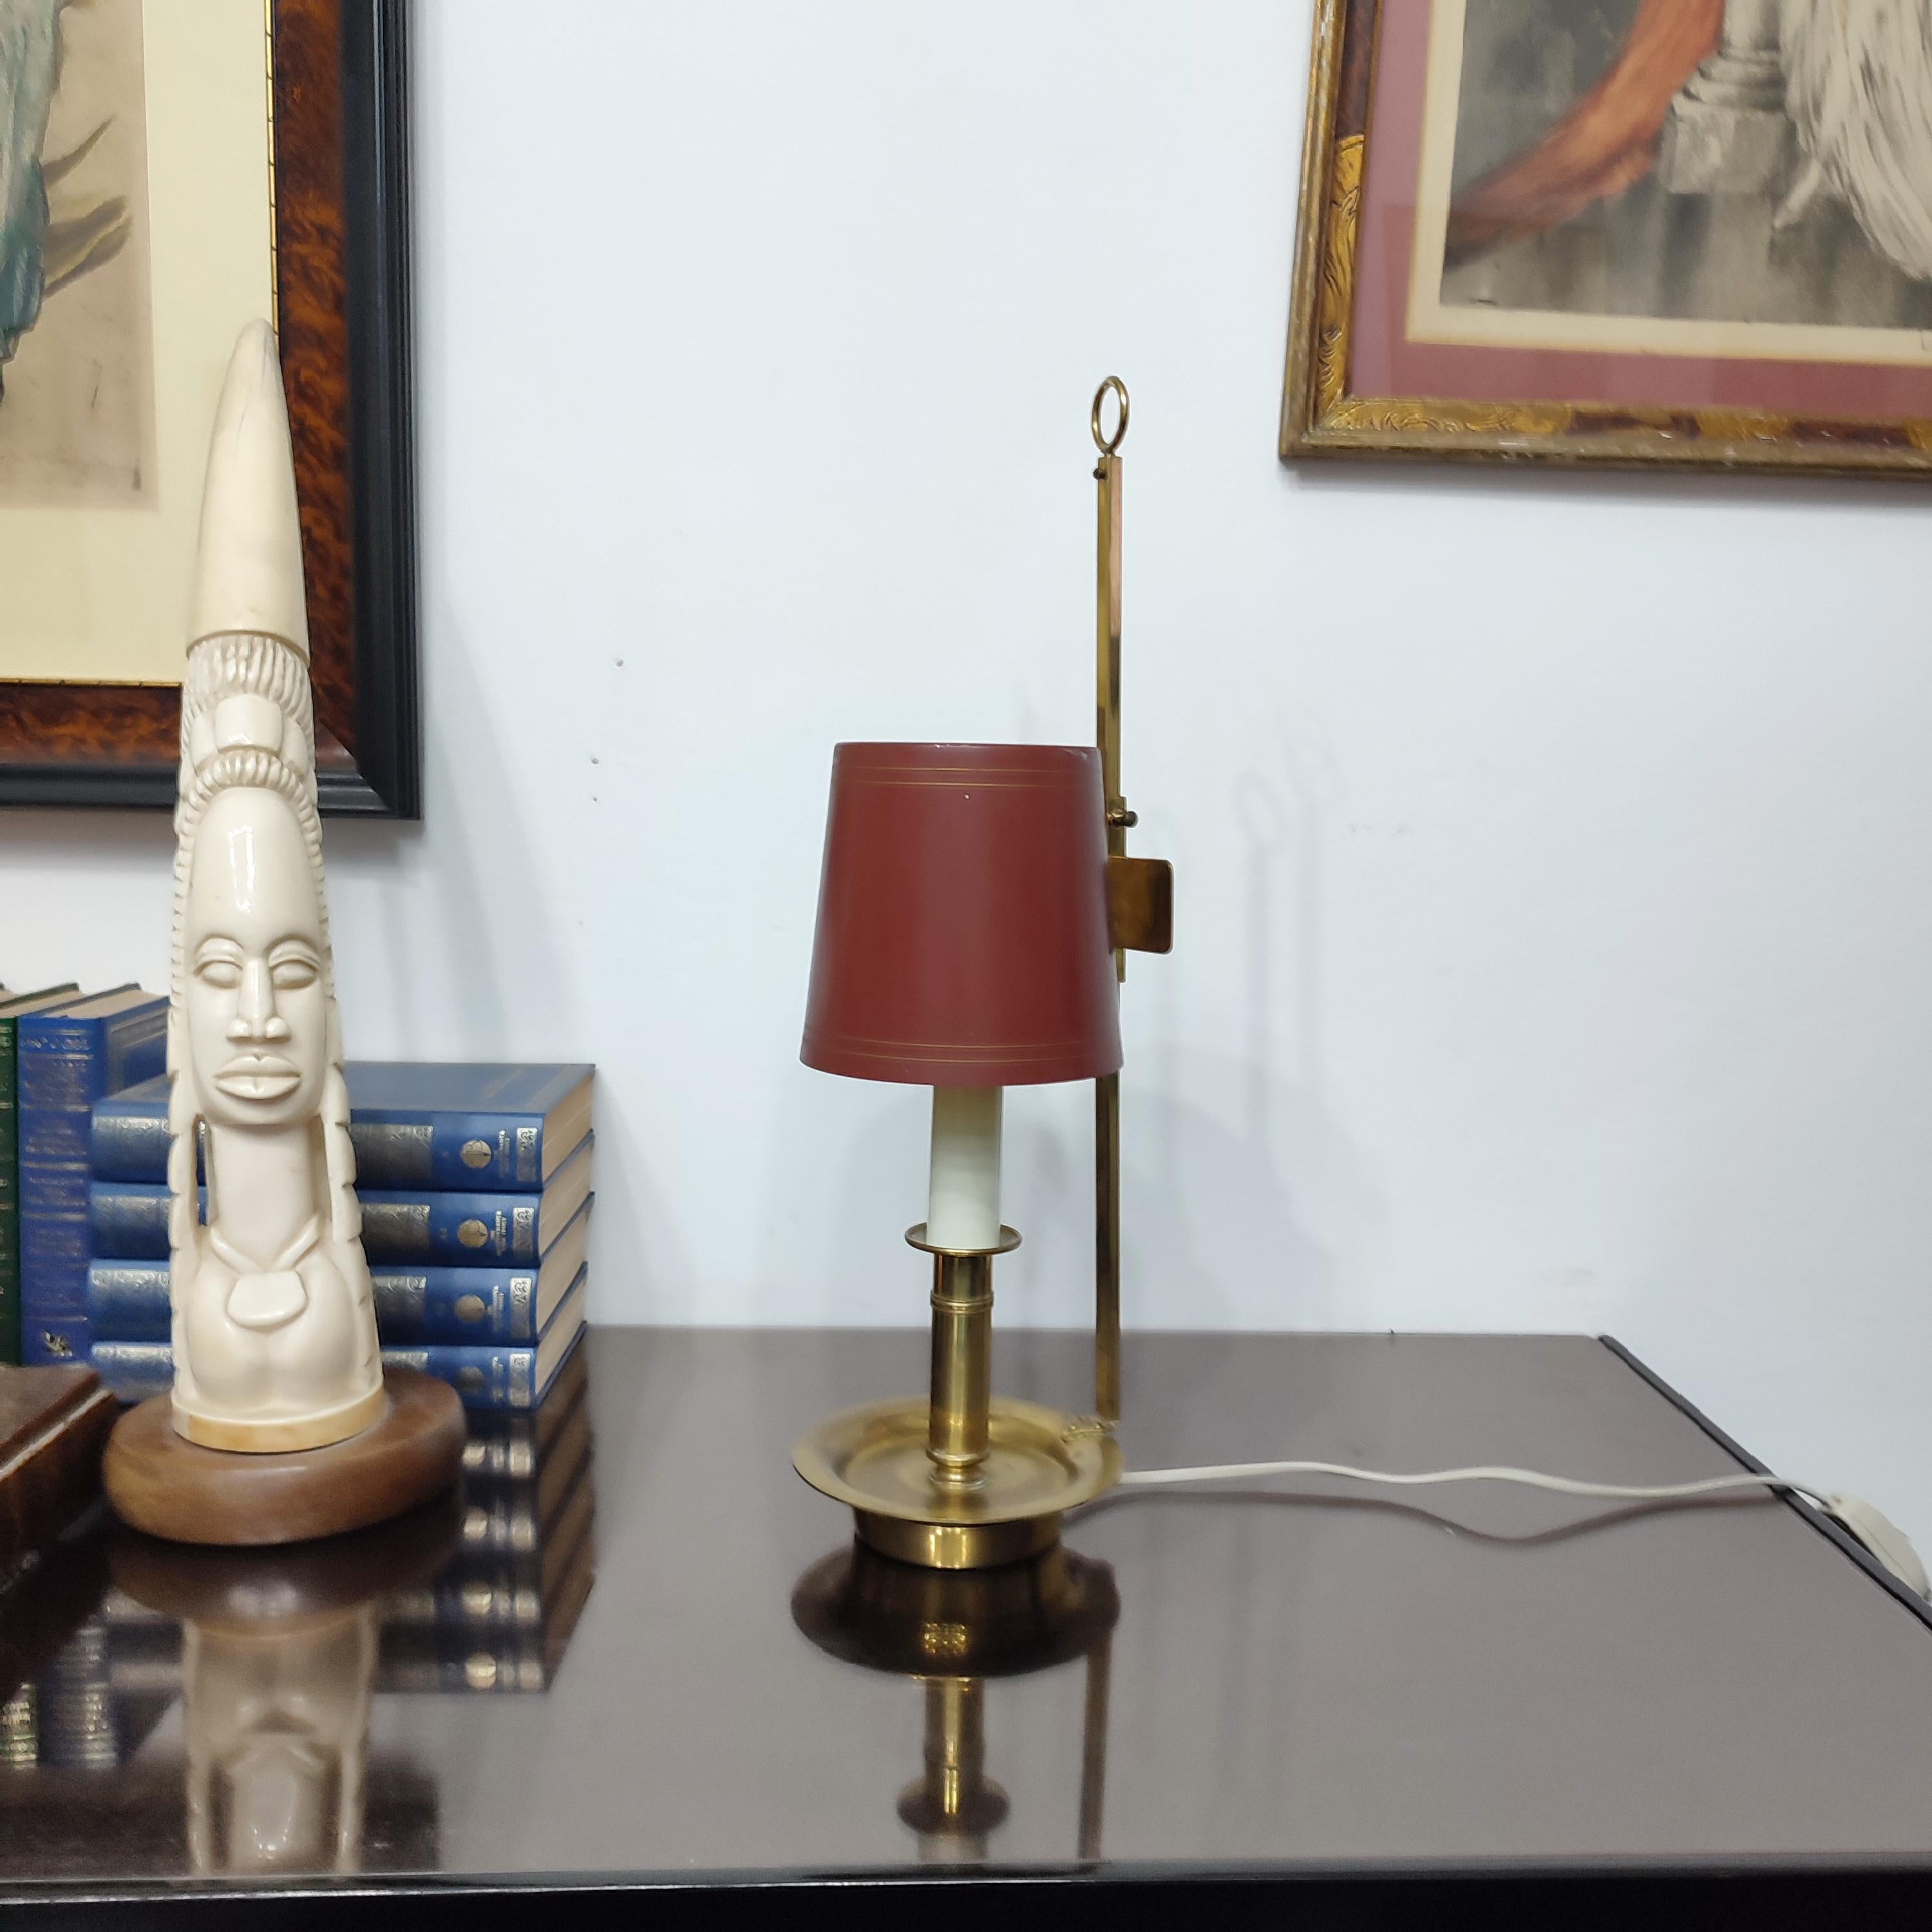 Vintage Danish brass reading table lamp by TH Valentiner Copenhagen
Exclusive and stylish table lamp made of brass mounted with rust-red shade in metal.
The lampshade can be adjusted up and down. Very good original condition,